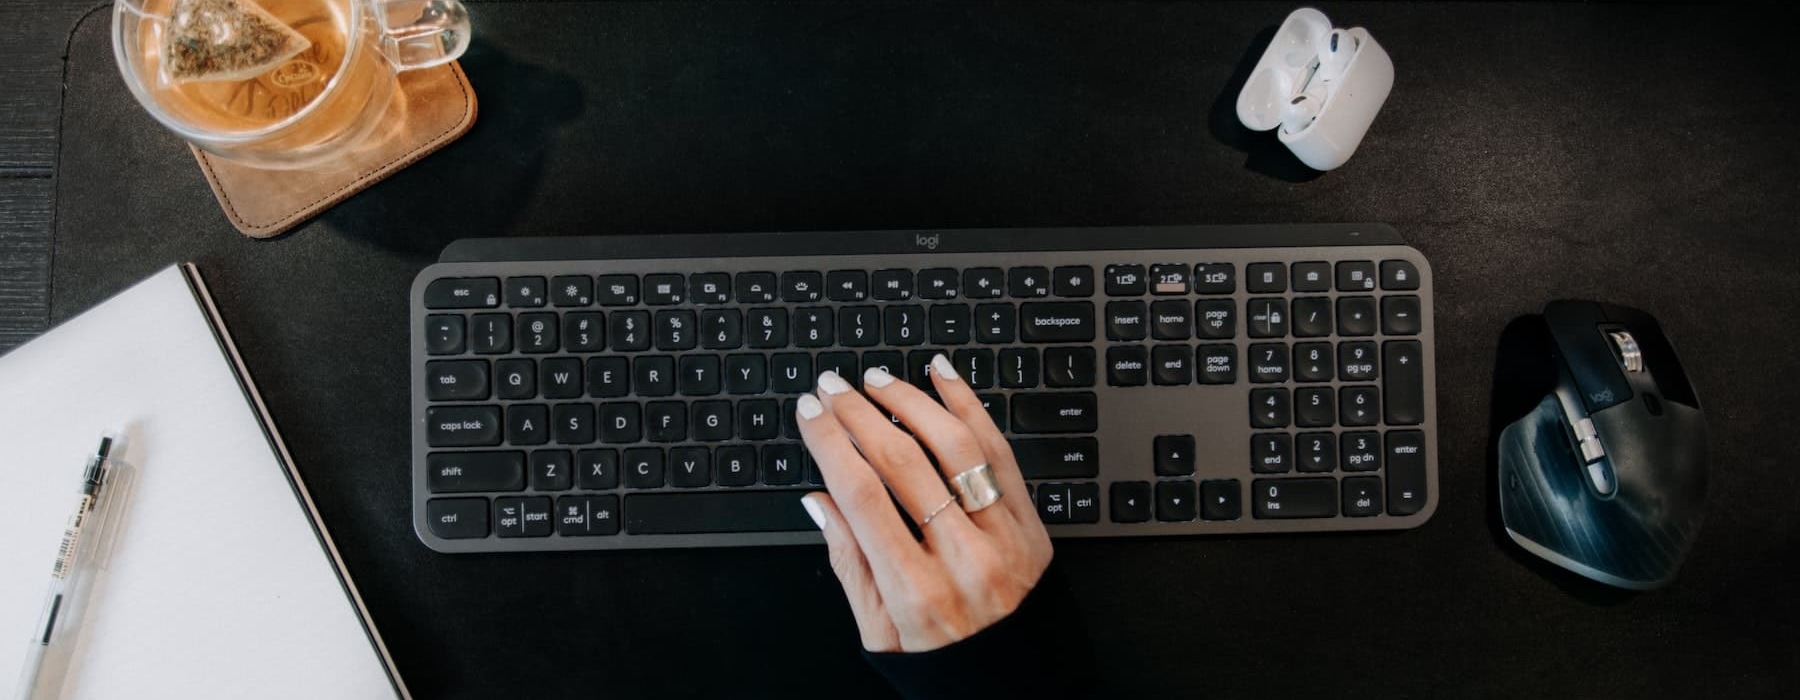 image of a hand on a keyboard beside an iced drink and common desk objects